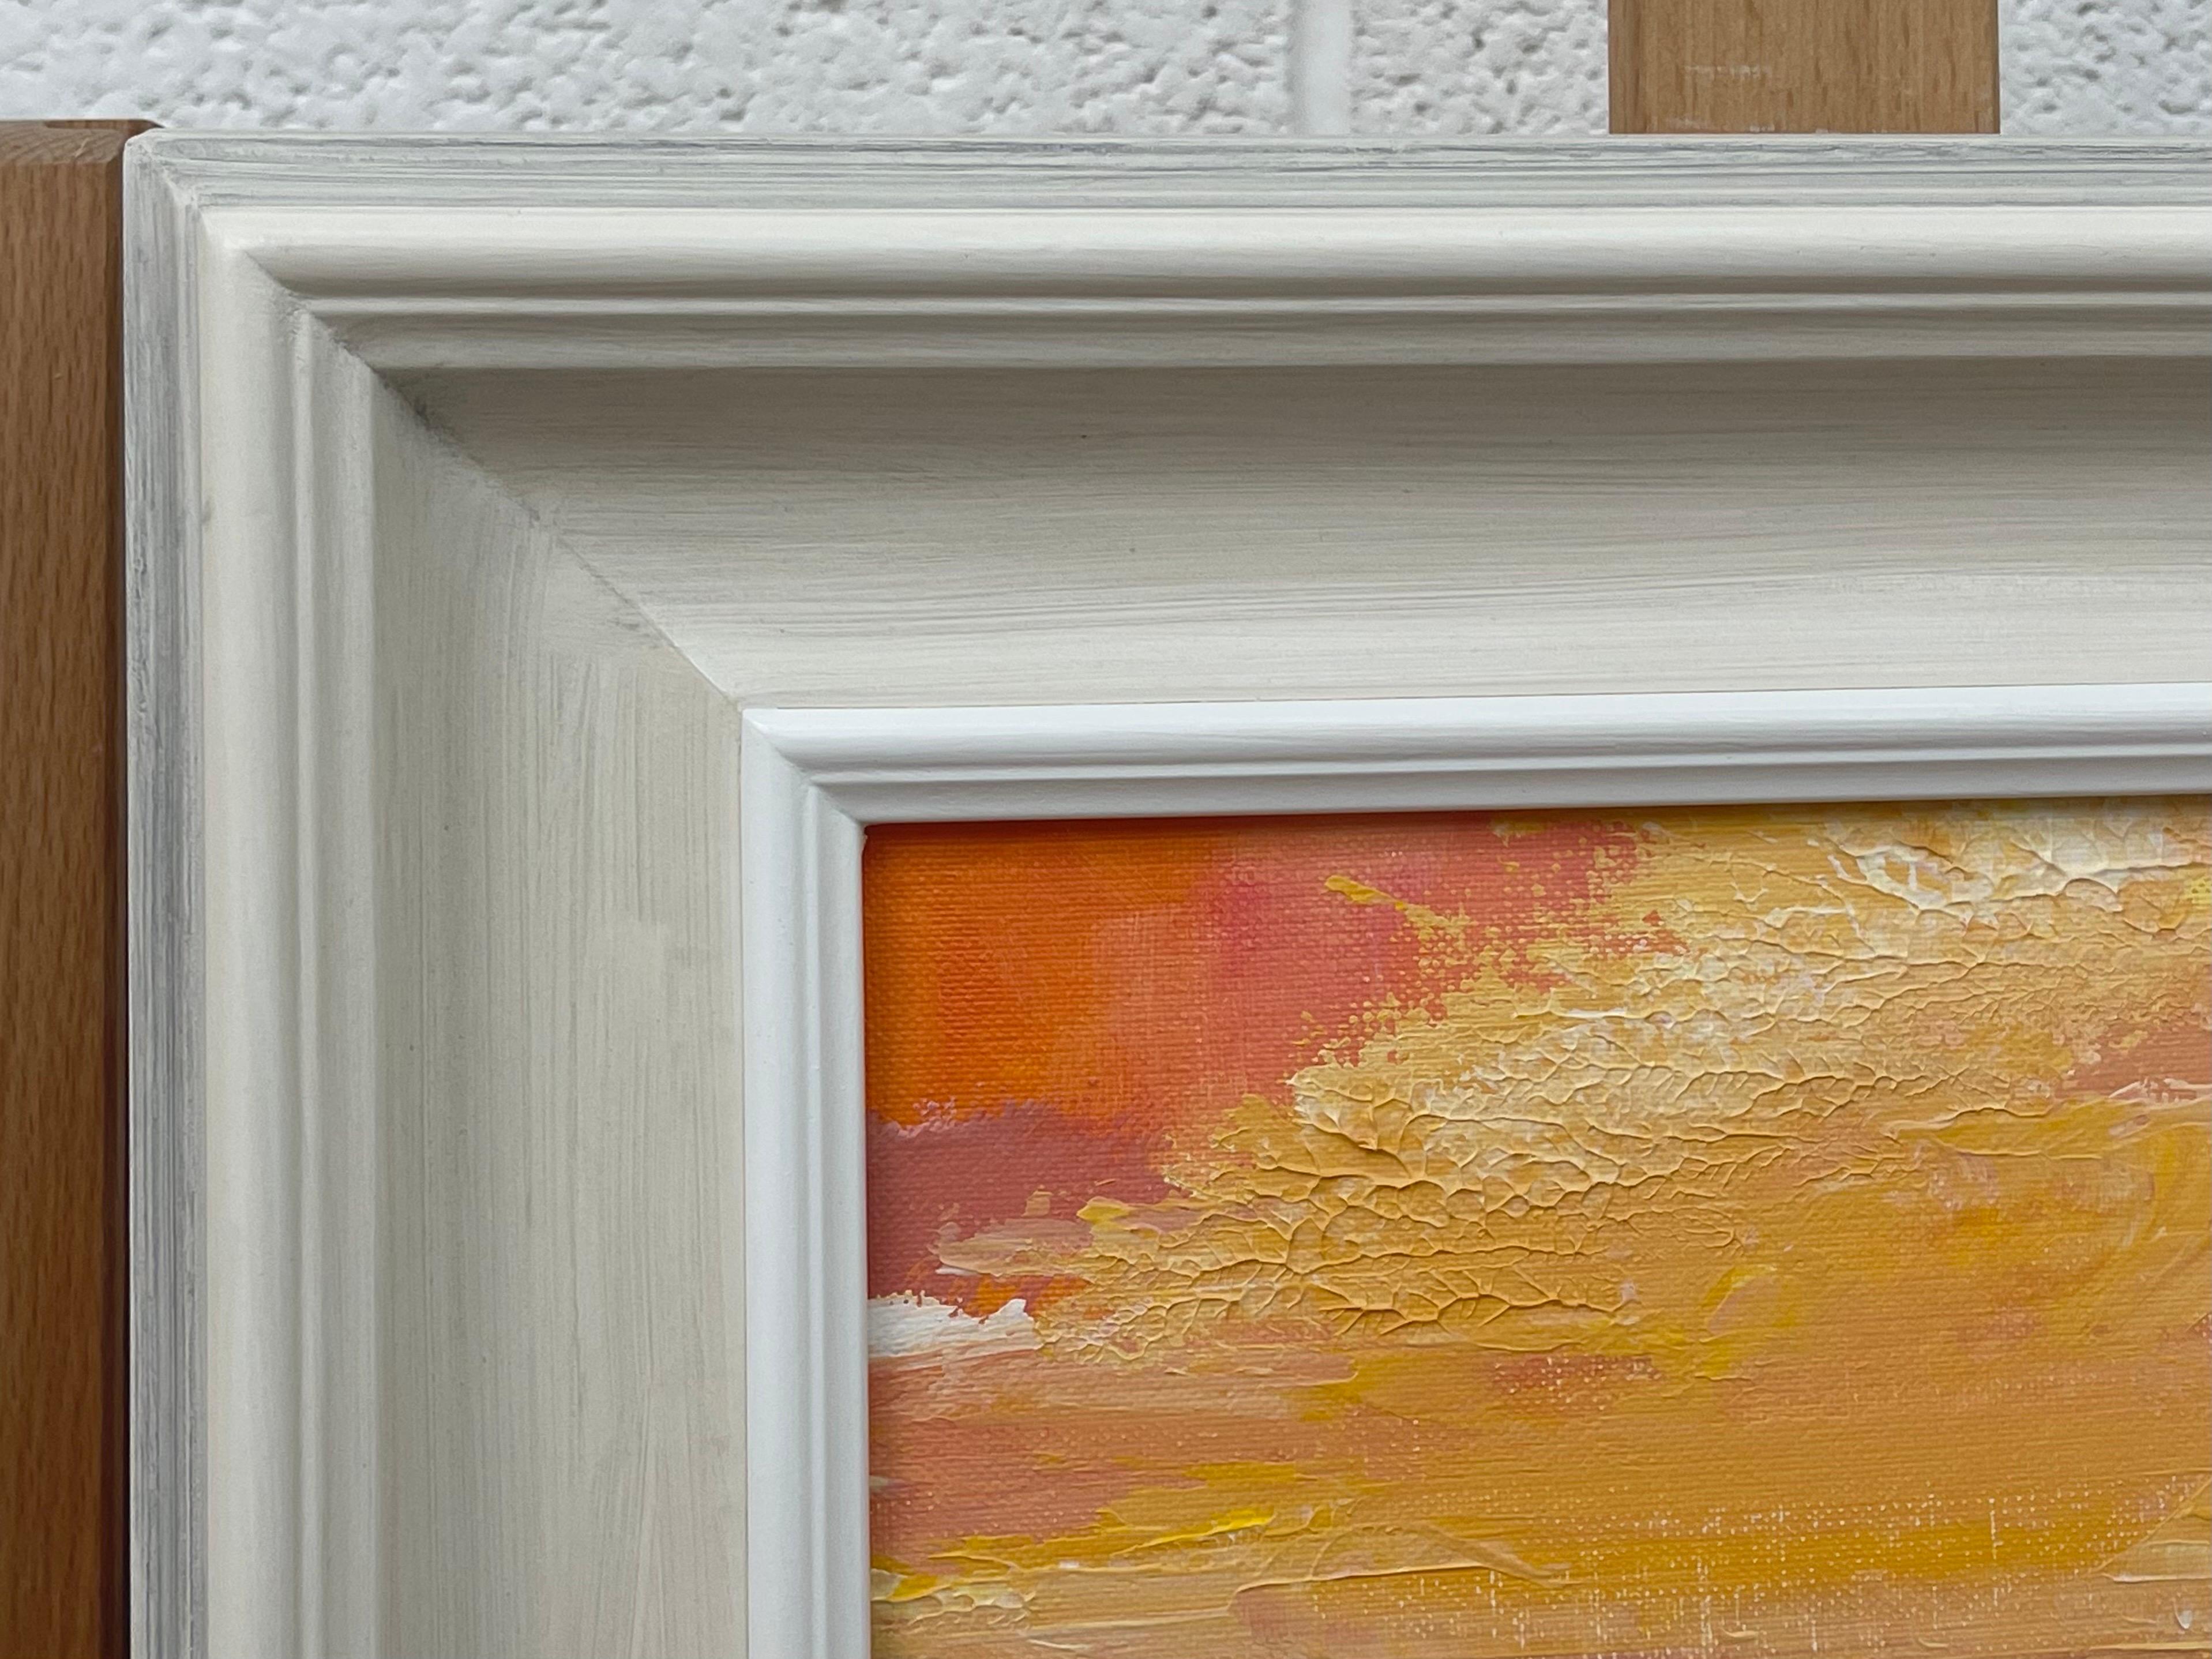 Abstract Impressionist Seascape Landscape by Contemporary British Artist, Angela Wakefield. An atmospheric painting of an imagined scene using muted pastel red, orange and yellow colours.  This unique original forms part of a new body of work based